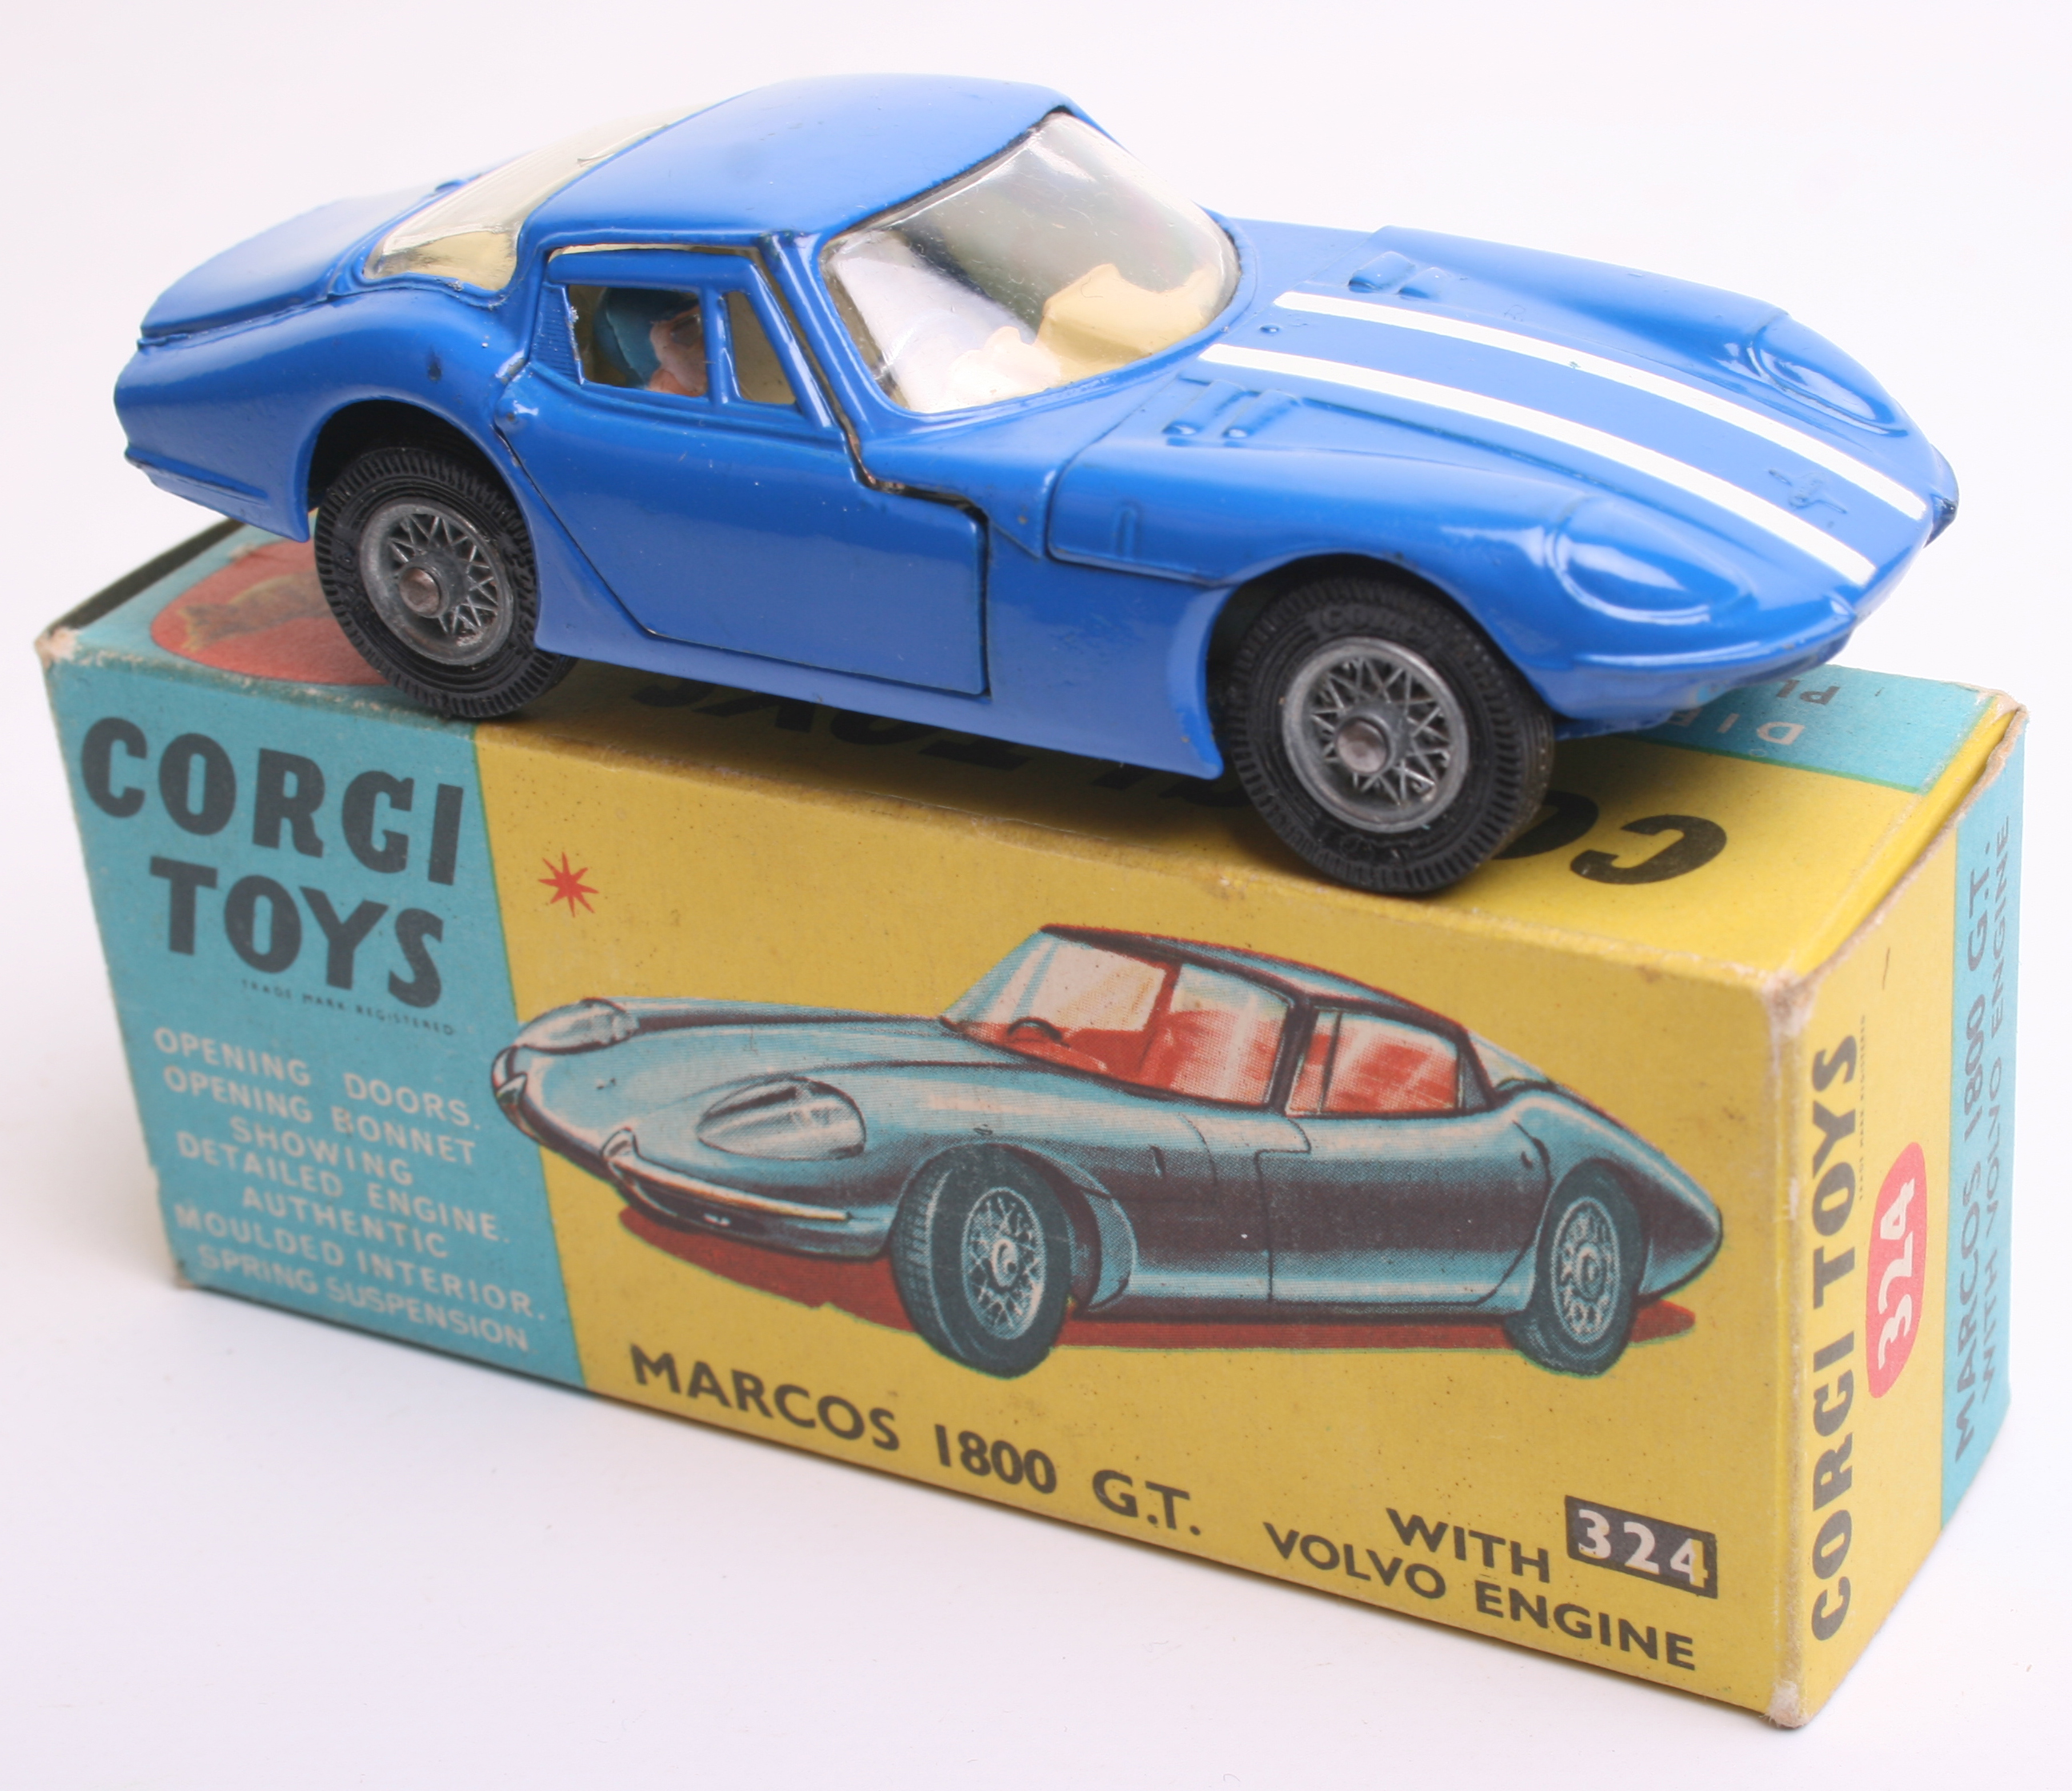 Corgi Toys 324 Marcos 1800 GT with Volvo Engine, blue body, pale blue/white interior, wire wheels,